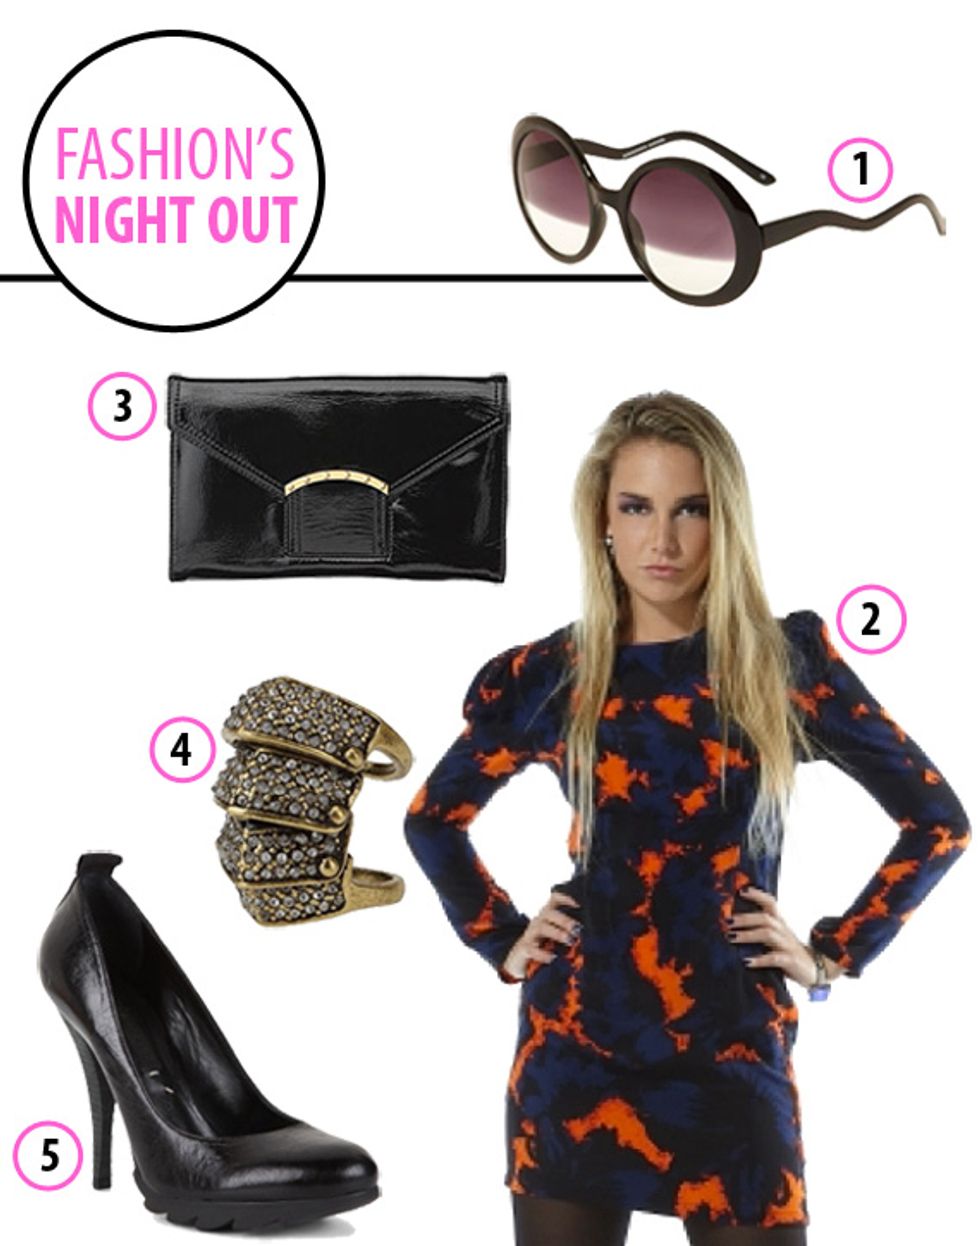 Look of the Week: Fashion's Night Out